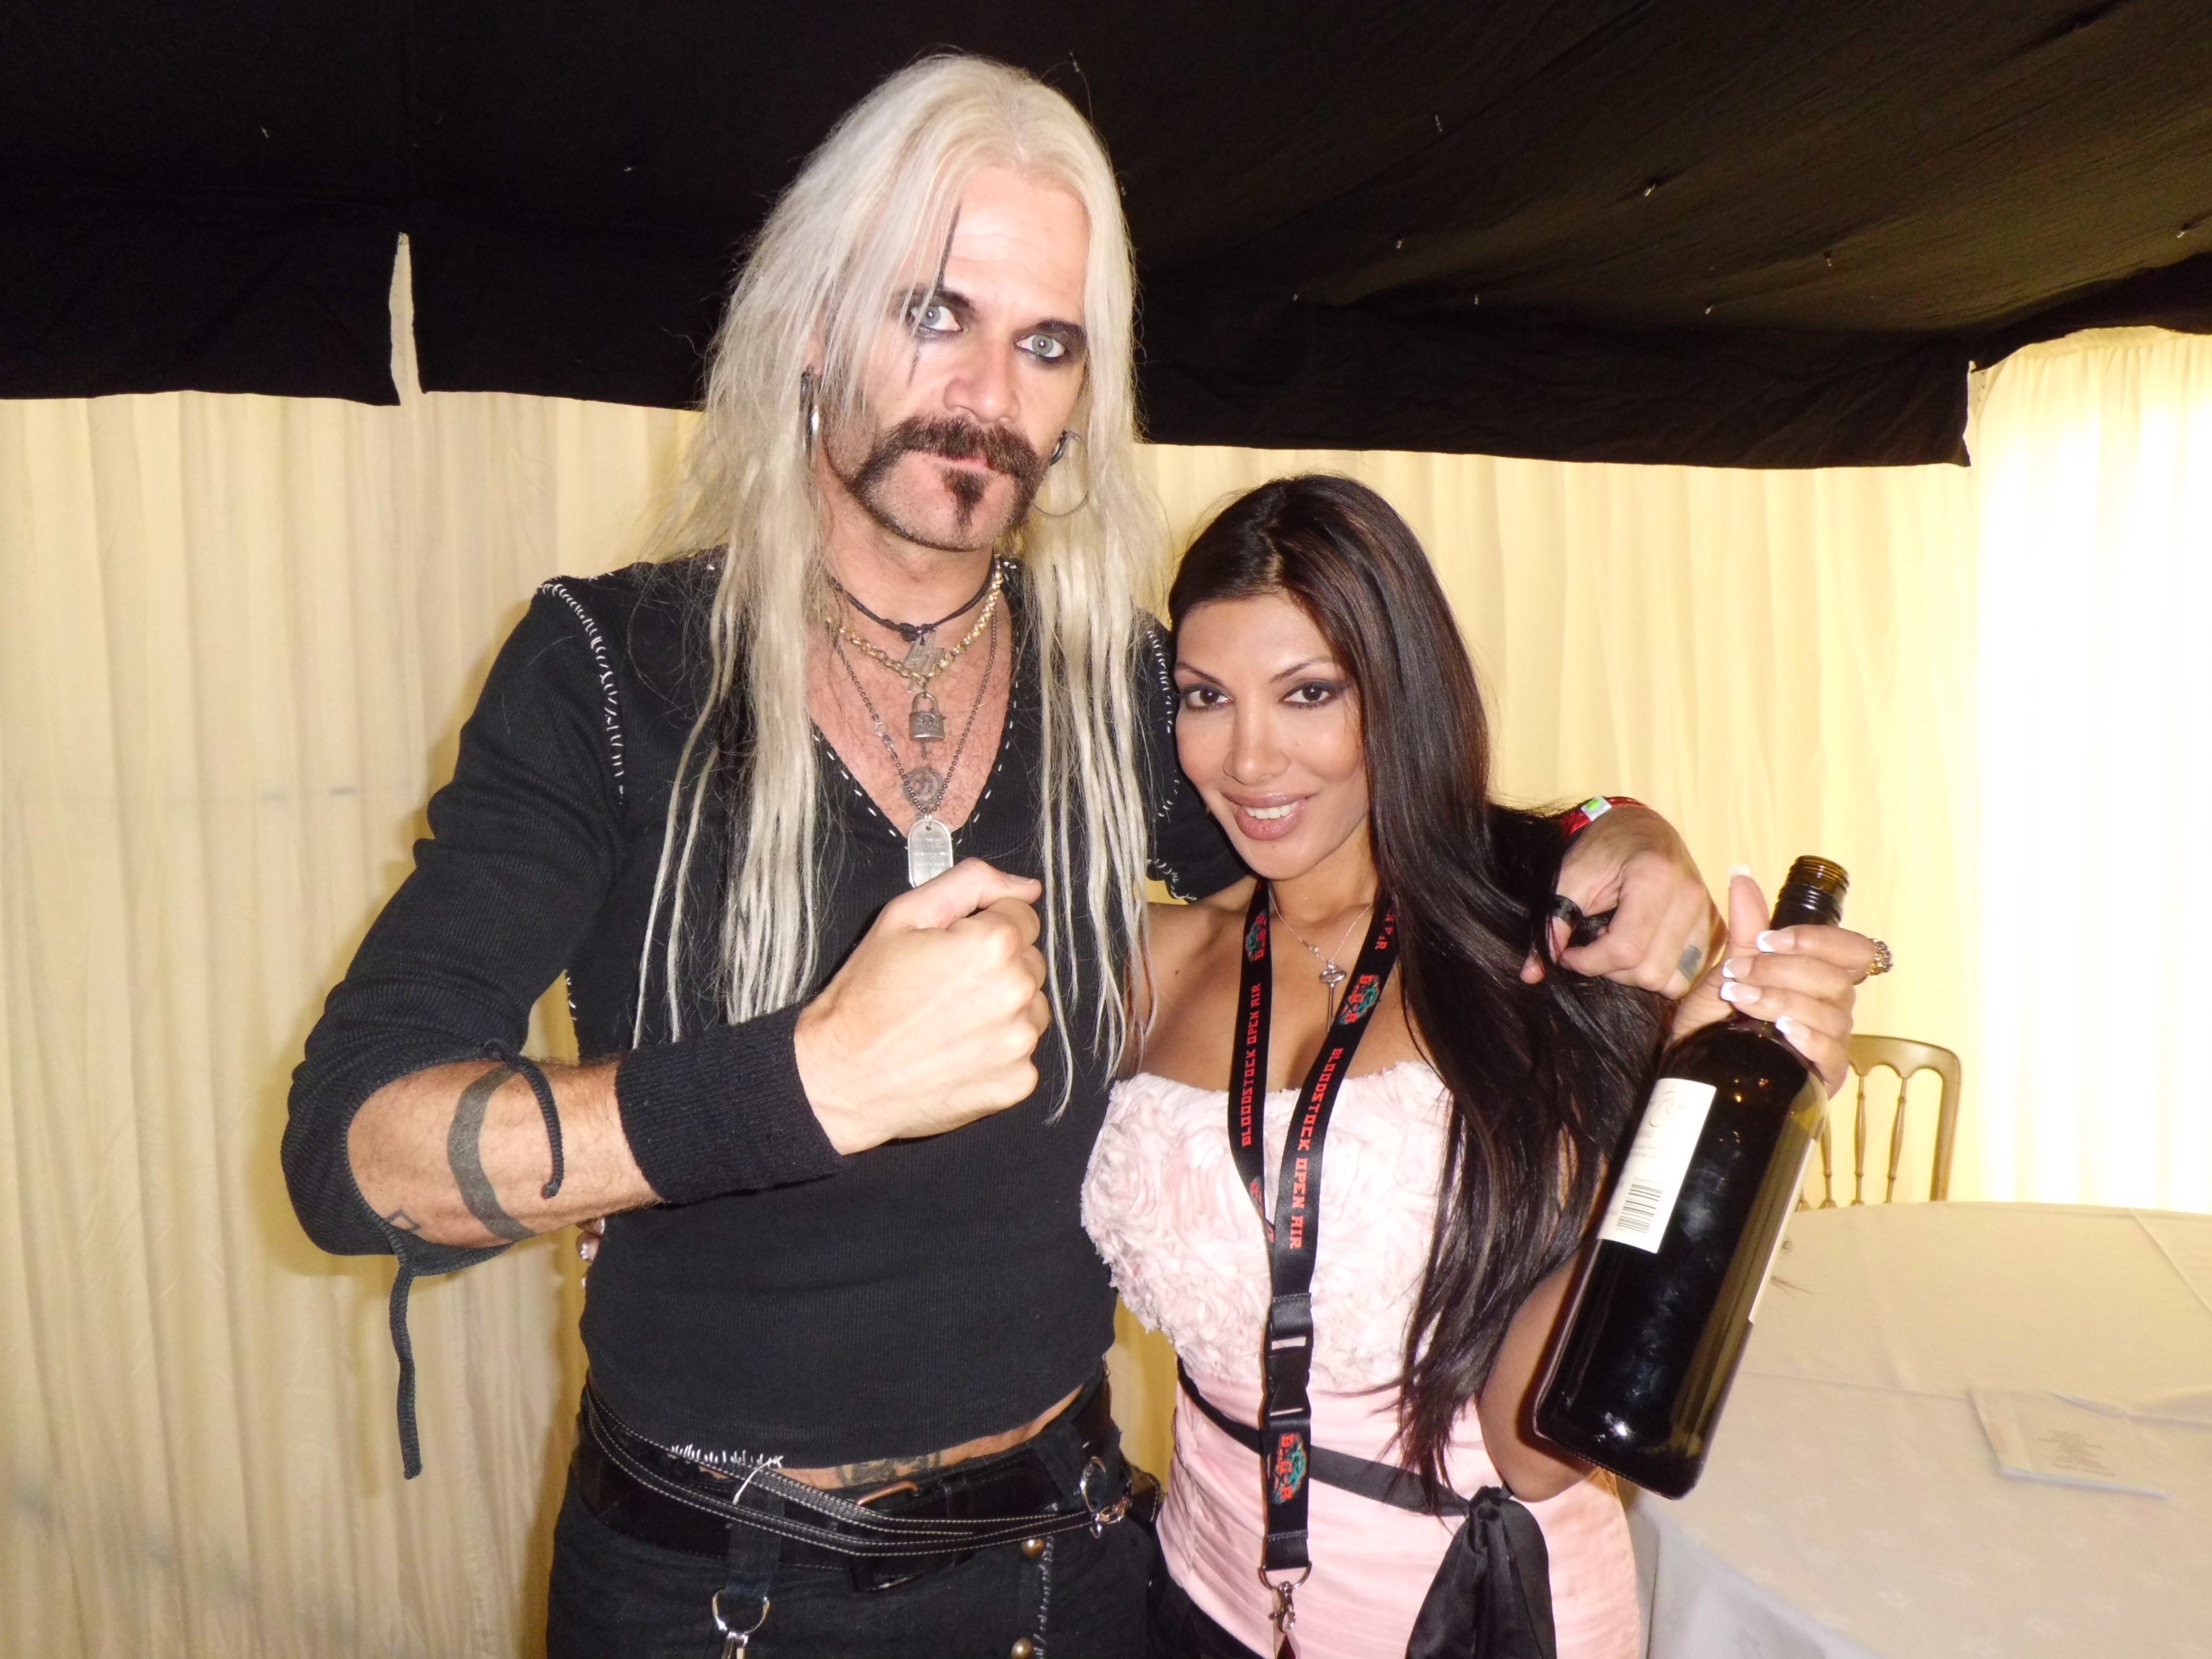 jasmin relaxing after the interview with scandic drum legend Snowy Shaw (Dream Evil, ex king diamond)